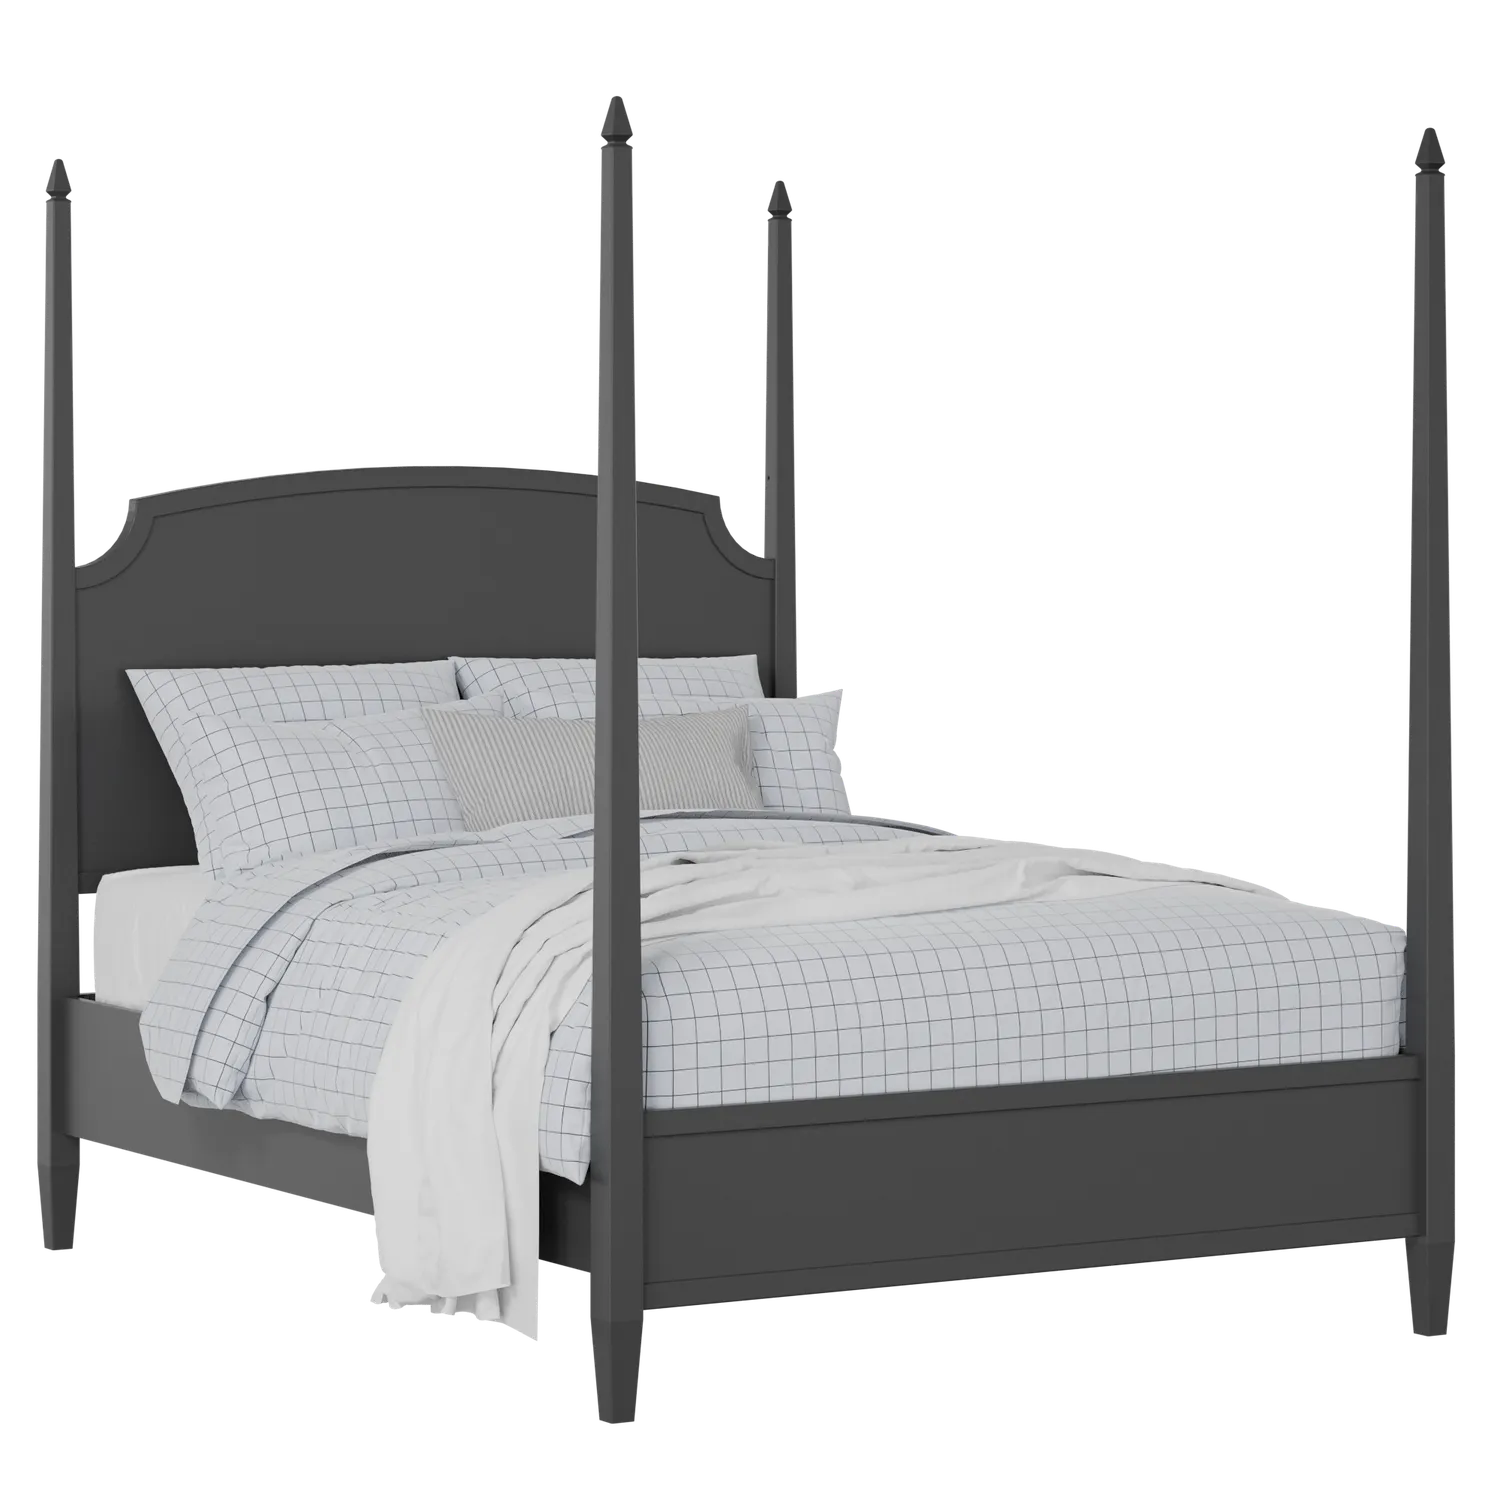 Austin Slim painted wood bed in black with Juno mattress